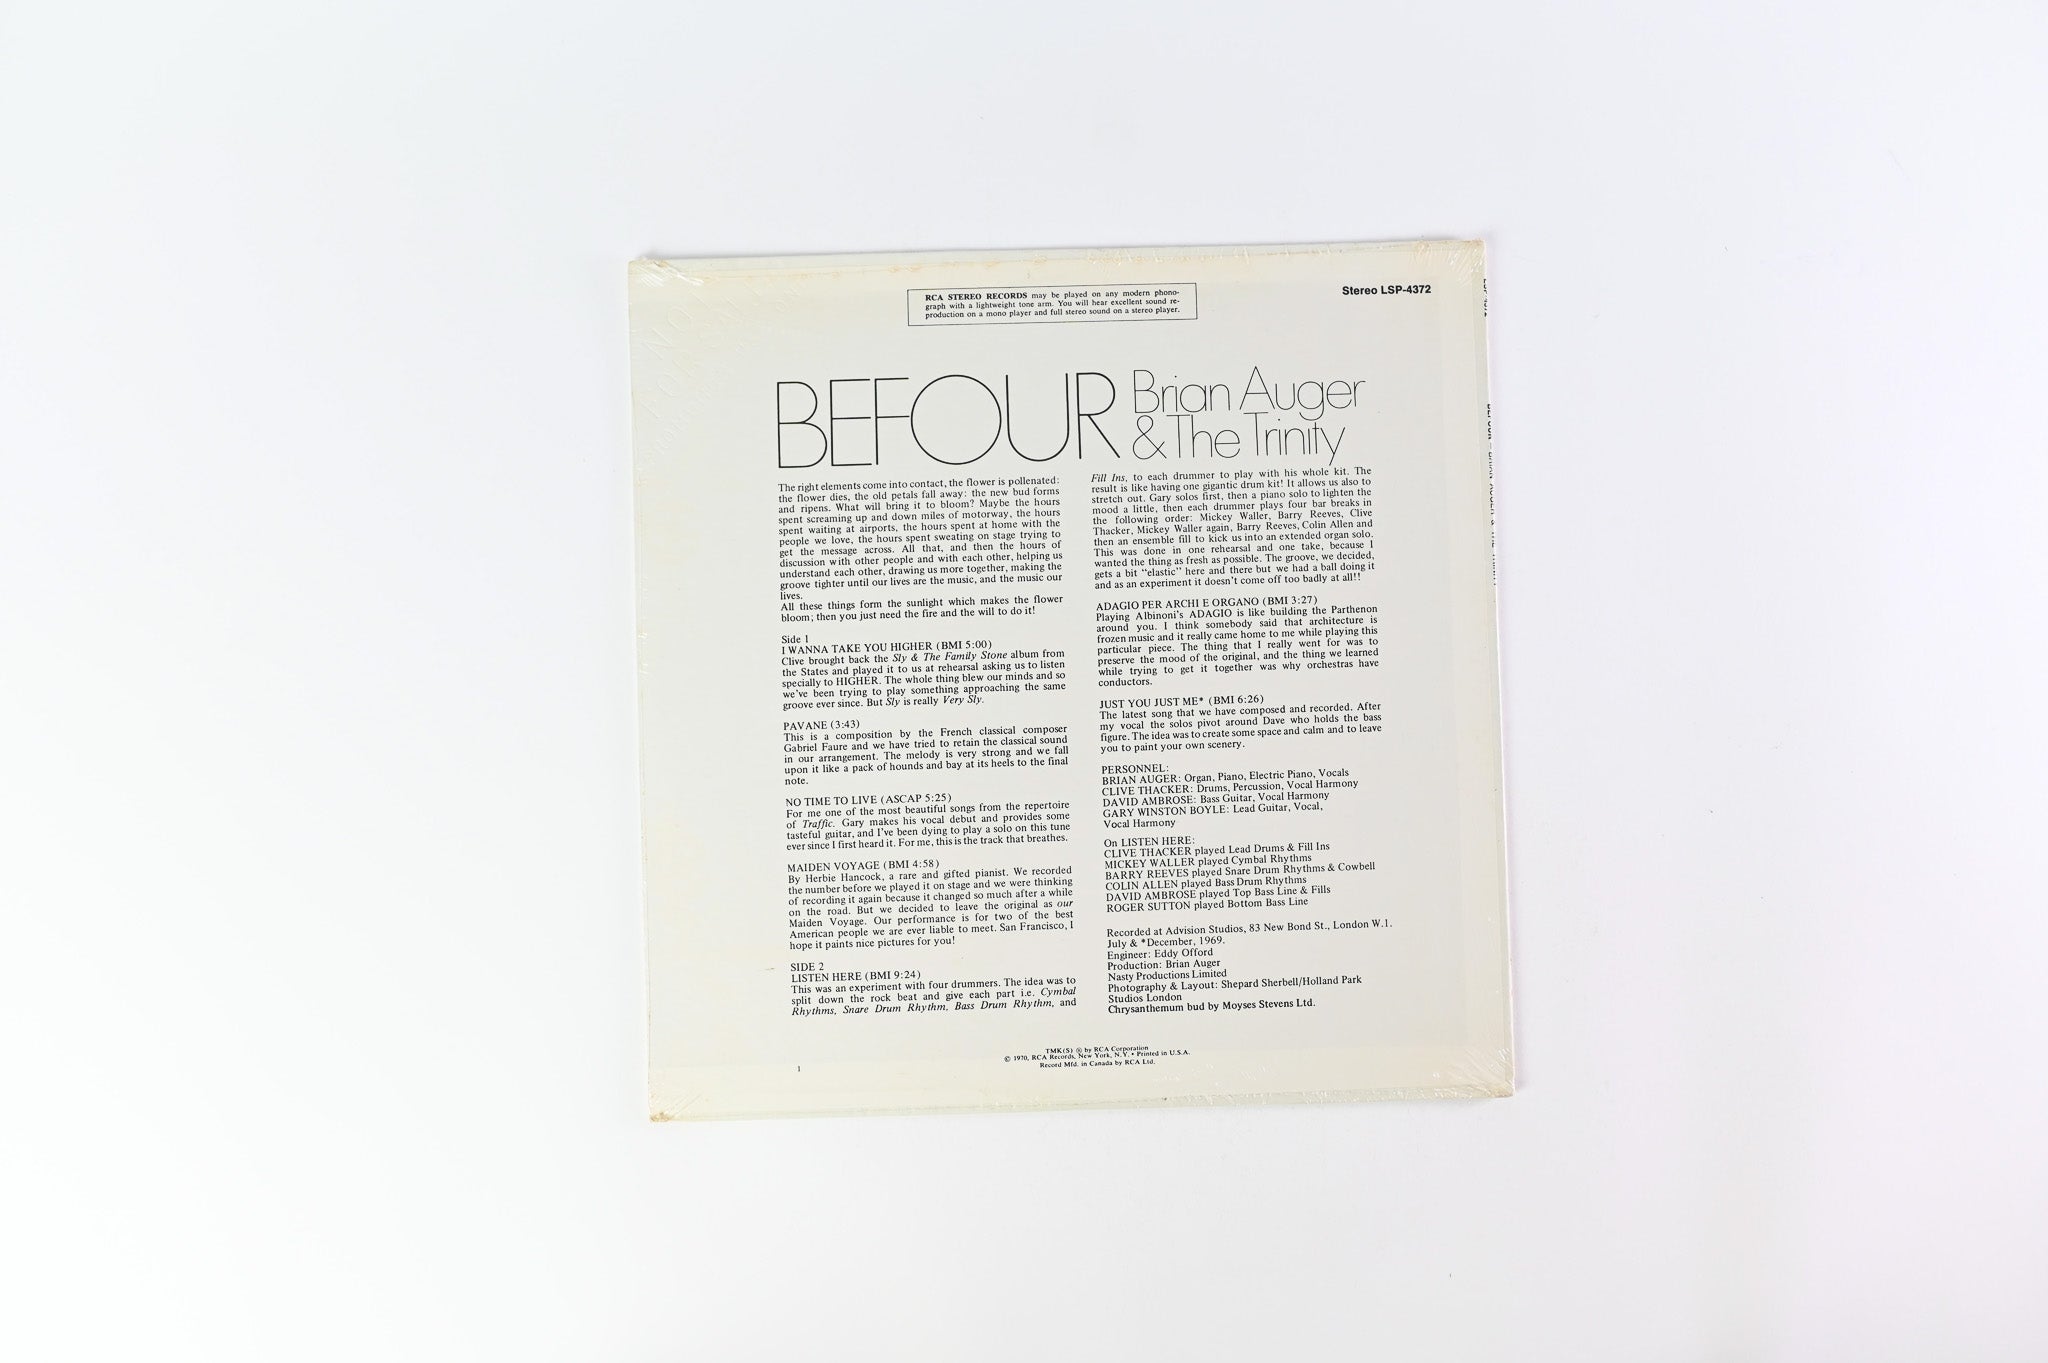 Brian Auger & The Trinity - Befour SEALED on RCA Victor